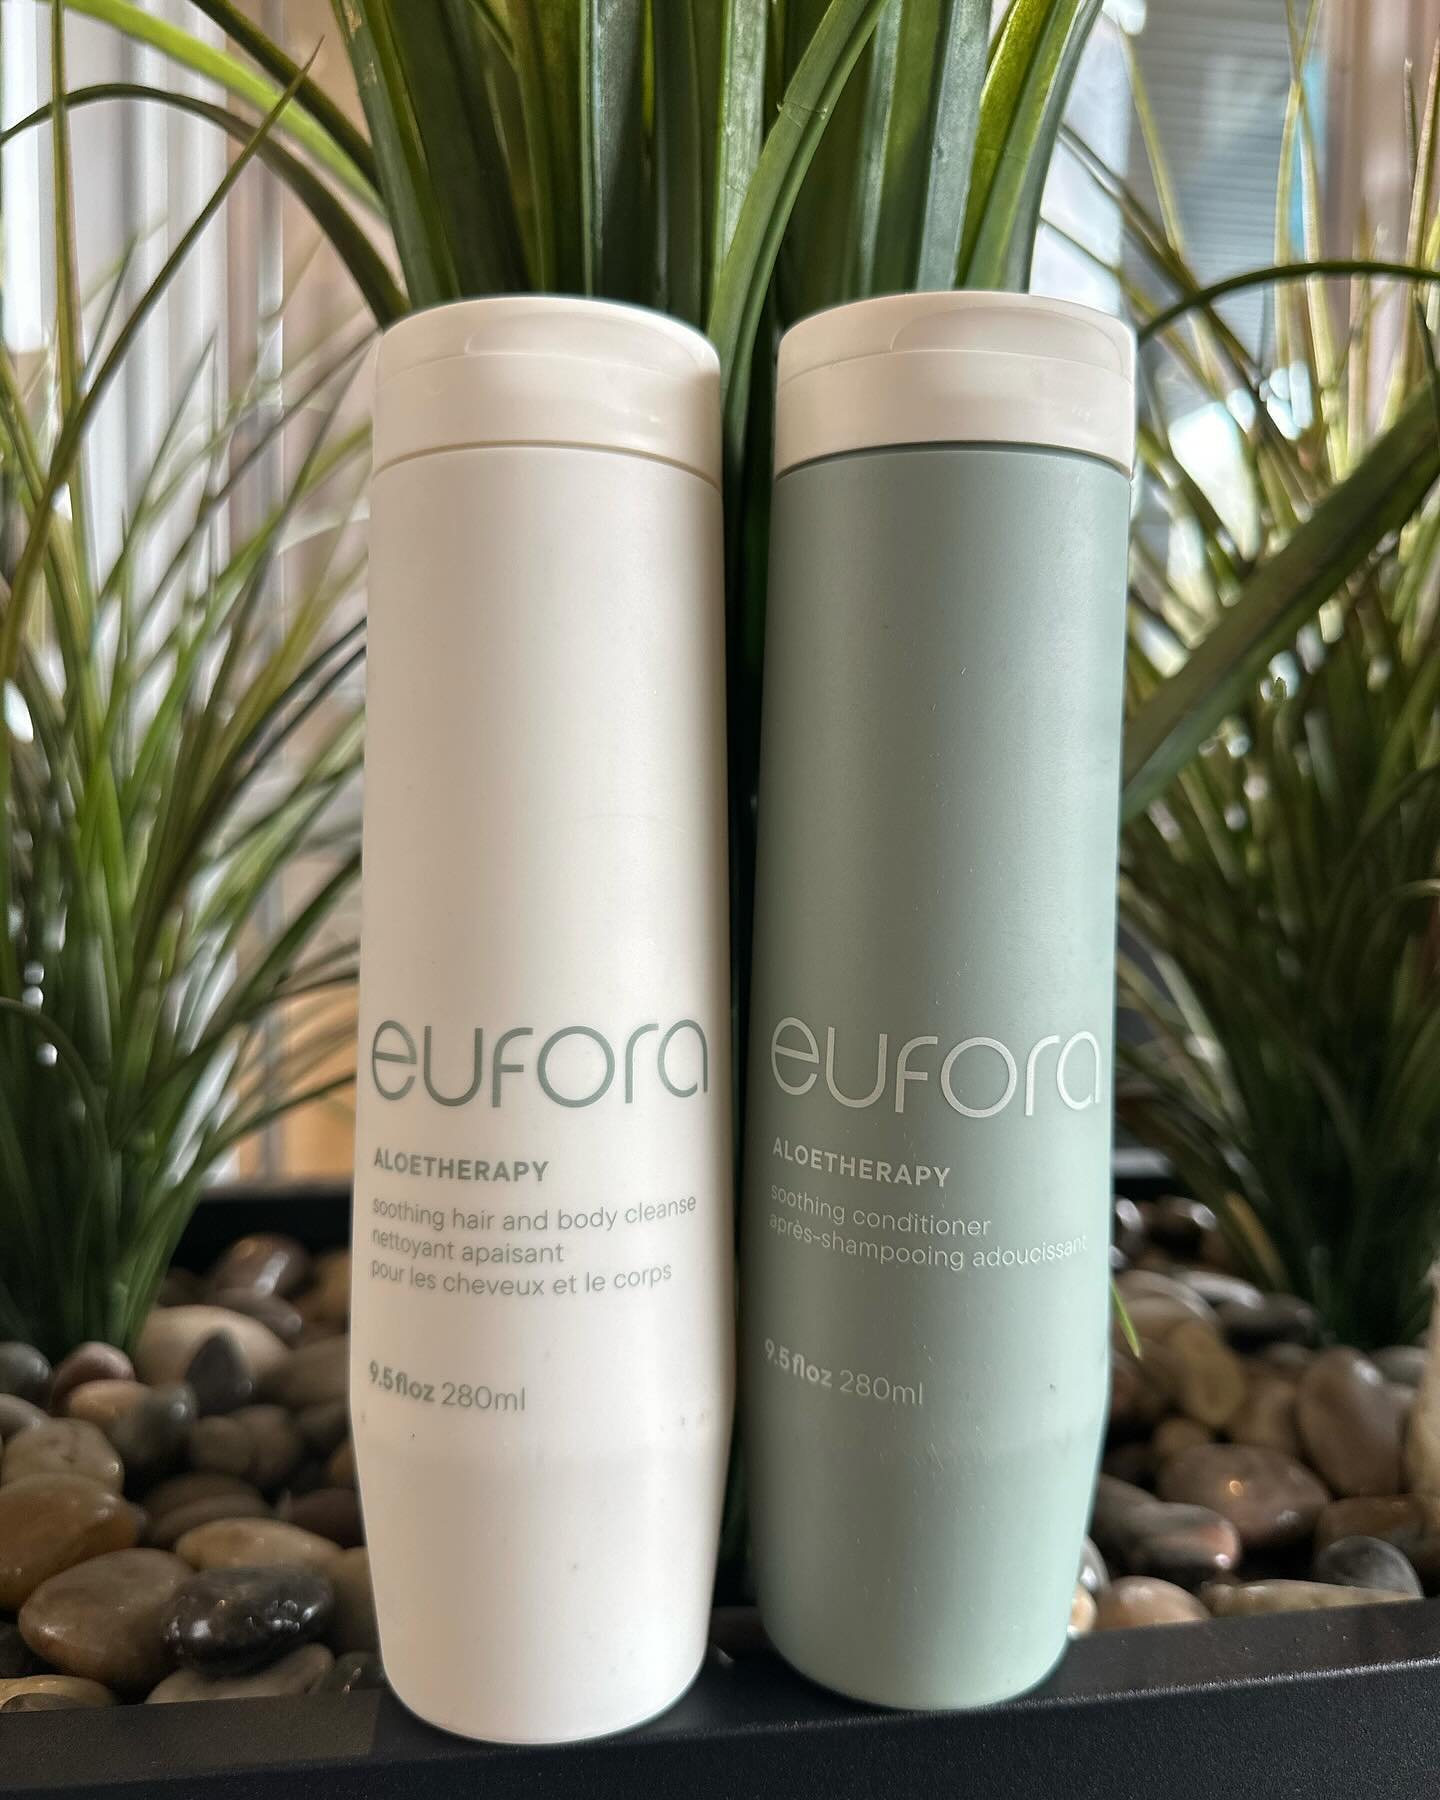 The perfect shampoo and conditioner for the sensitive types needing gentle, yet powerful moisture replenishment with soothing benefits for skin and scalp! #tommiesalon